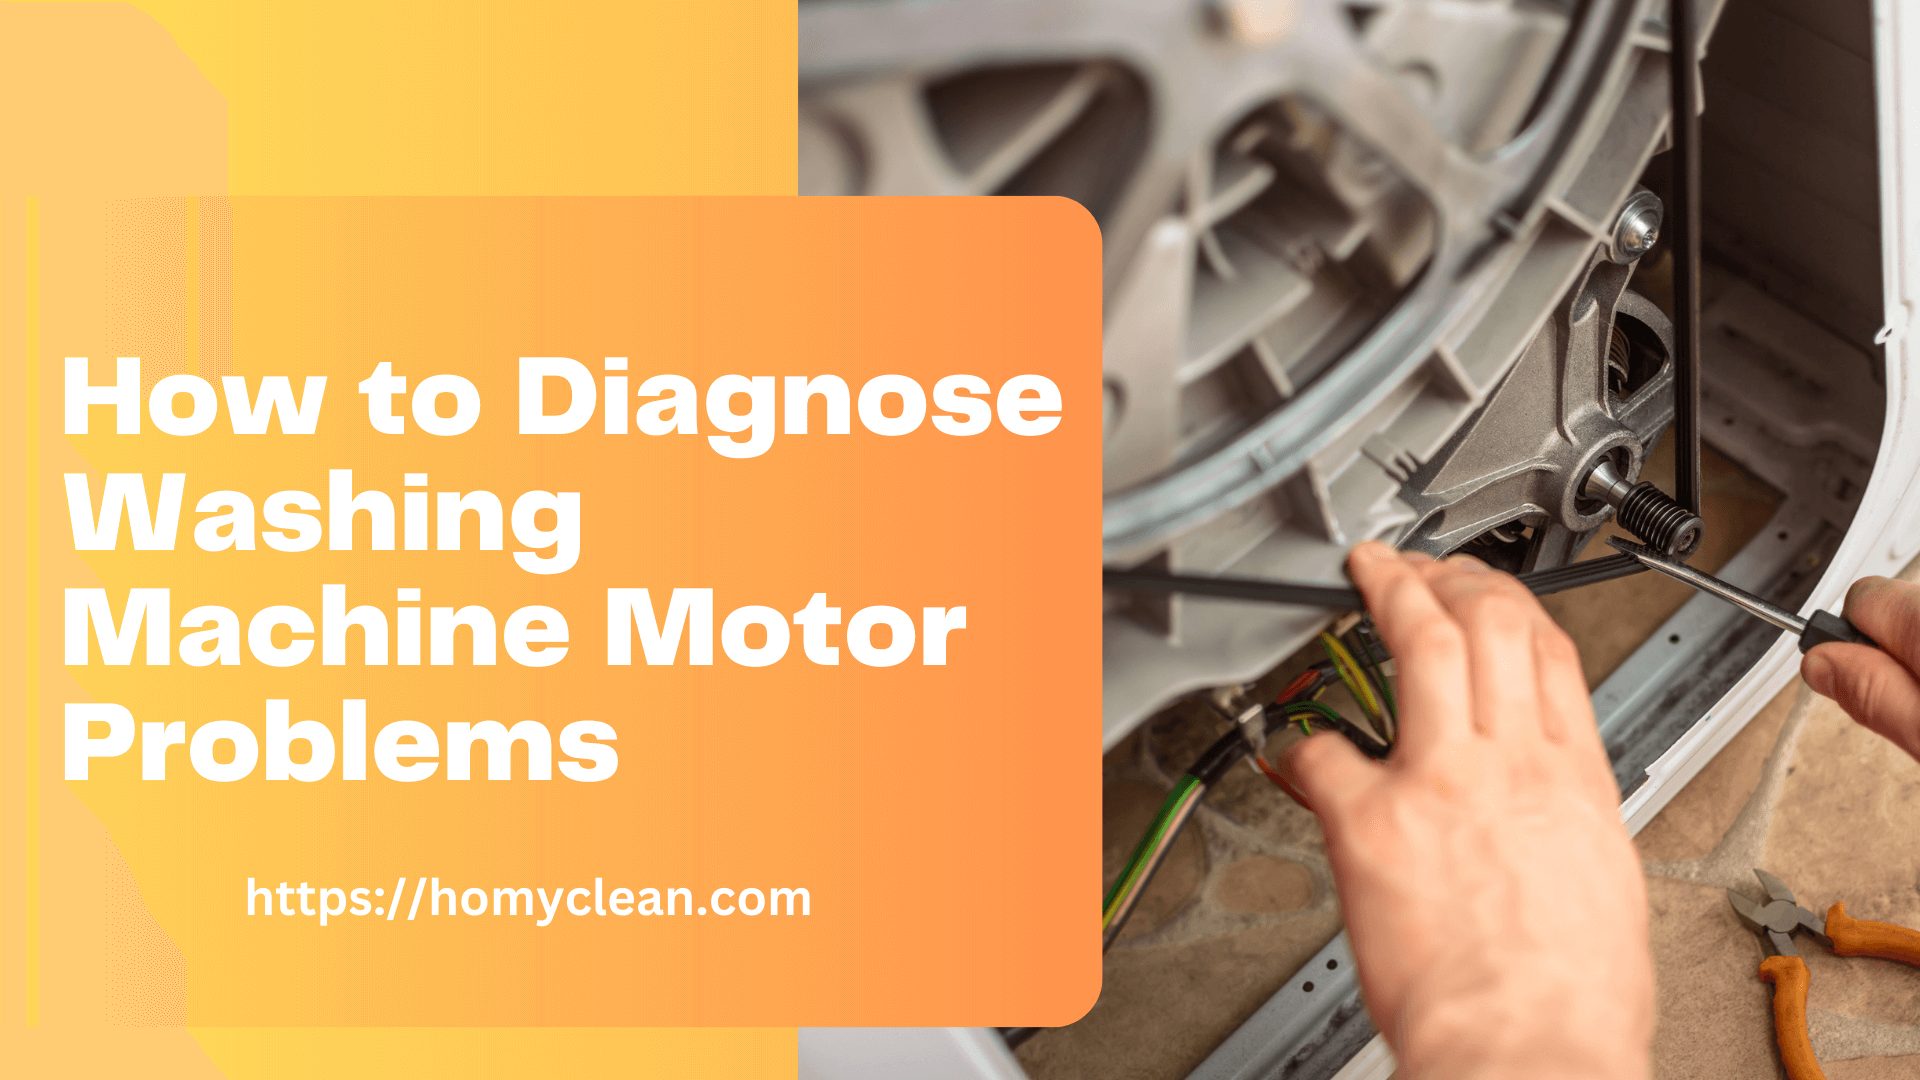 How to Diagnose Washing Machine Motor Problems